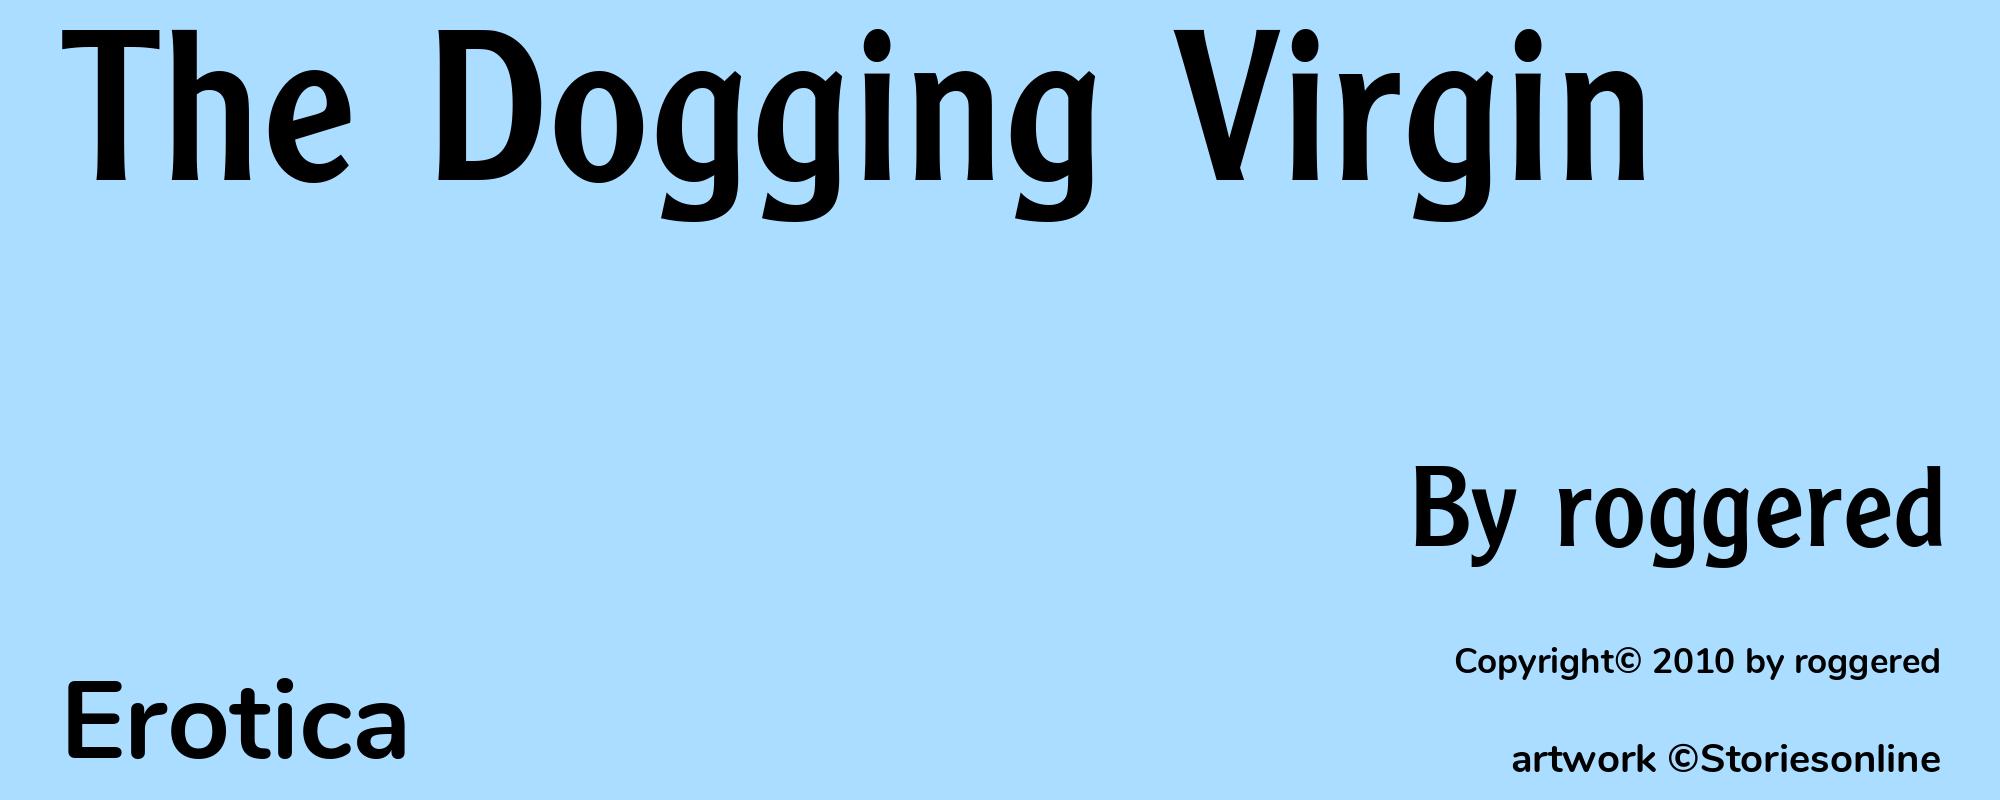 The Dogging Virgin - Cover